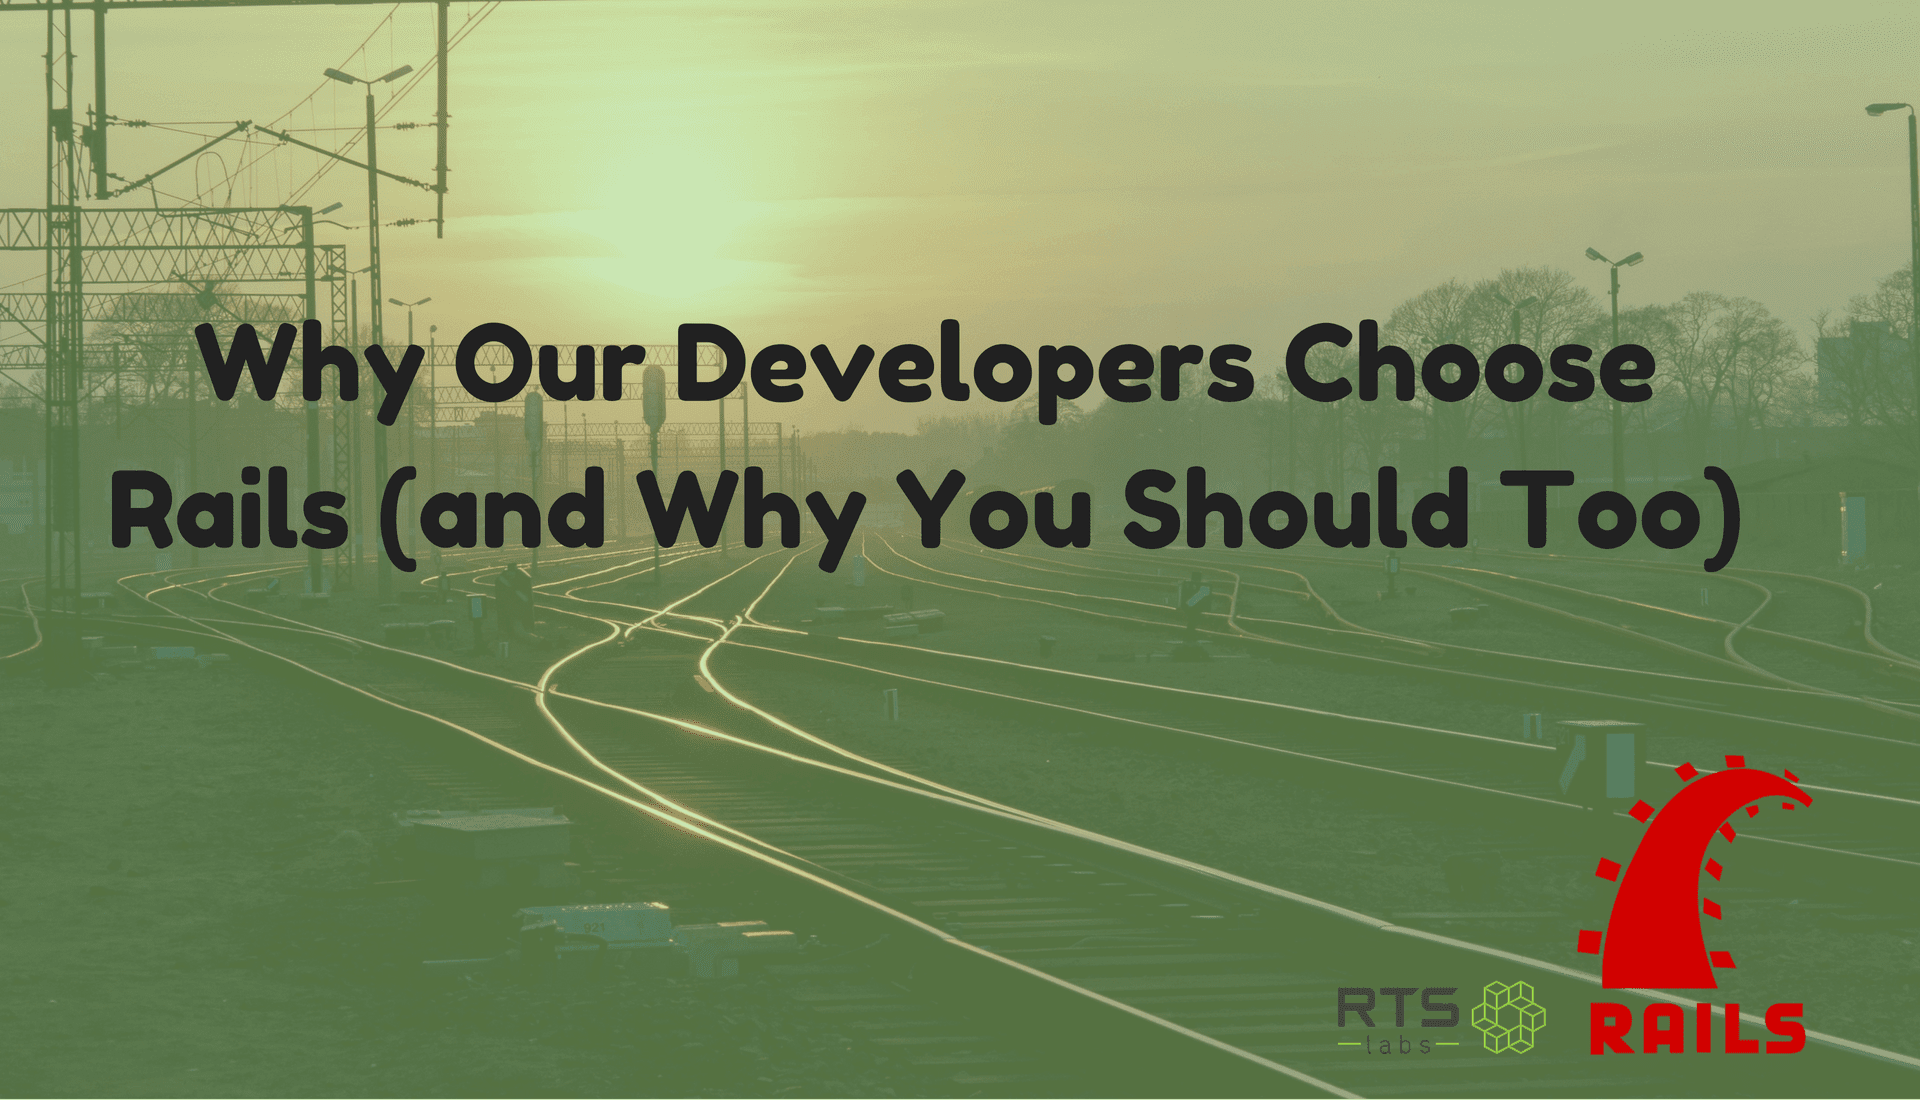 Why Our Developers Choose Rails and Why You Should Too